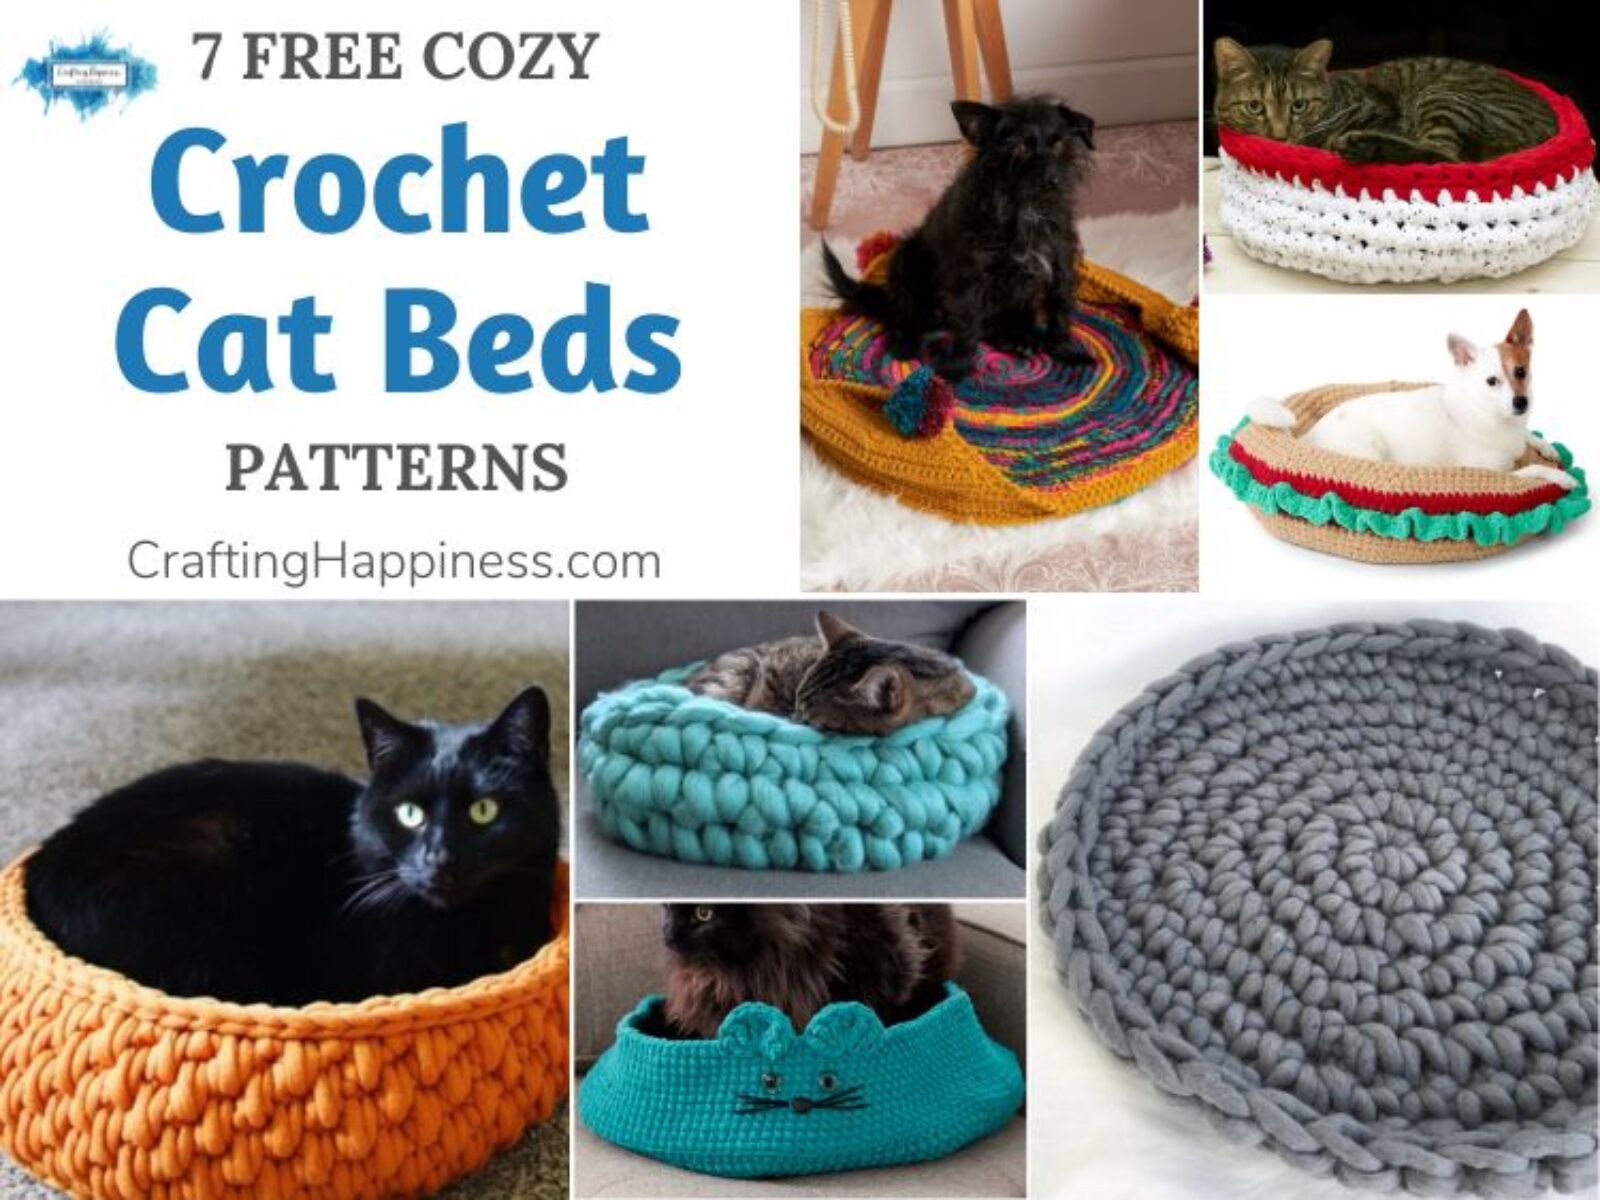 7 Free Cozy Cat Bed Crochet Patterns FB POSTER